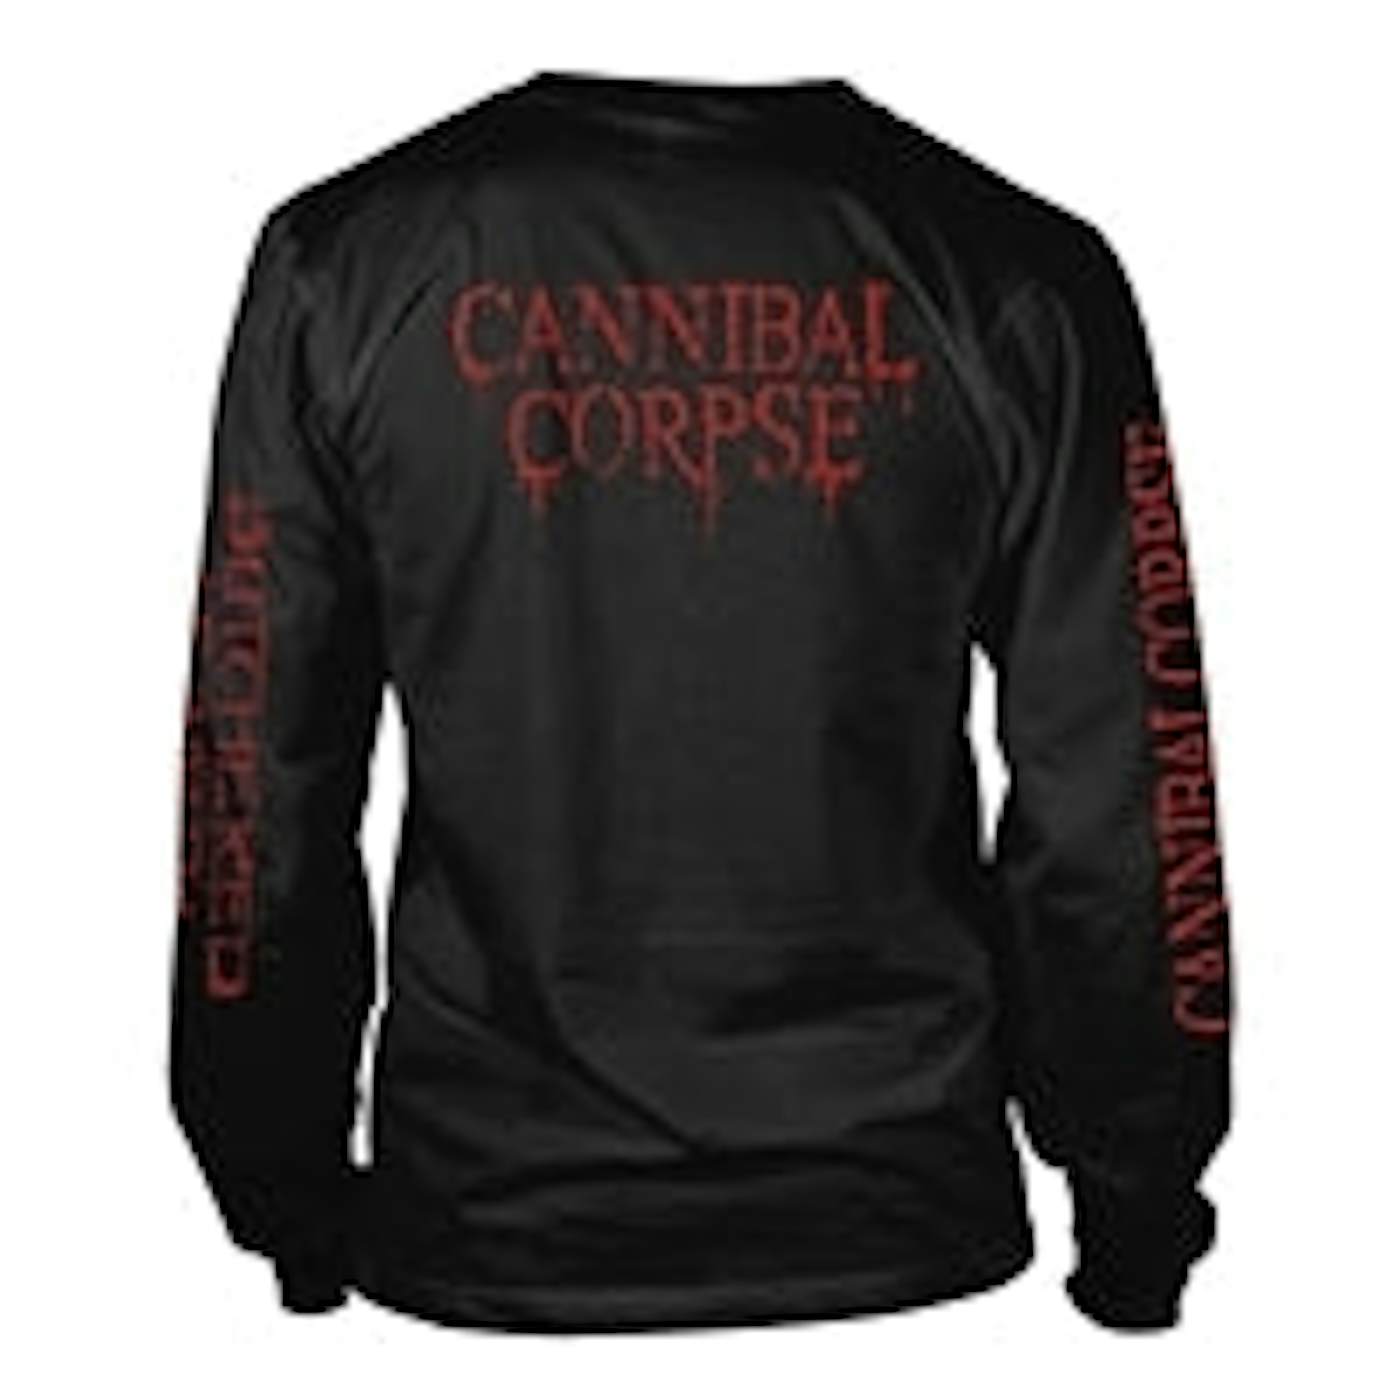 Cannibal Corpse Long Sleeve T Shirt - Butchered At Birth (Explicit)